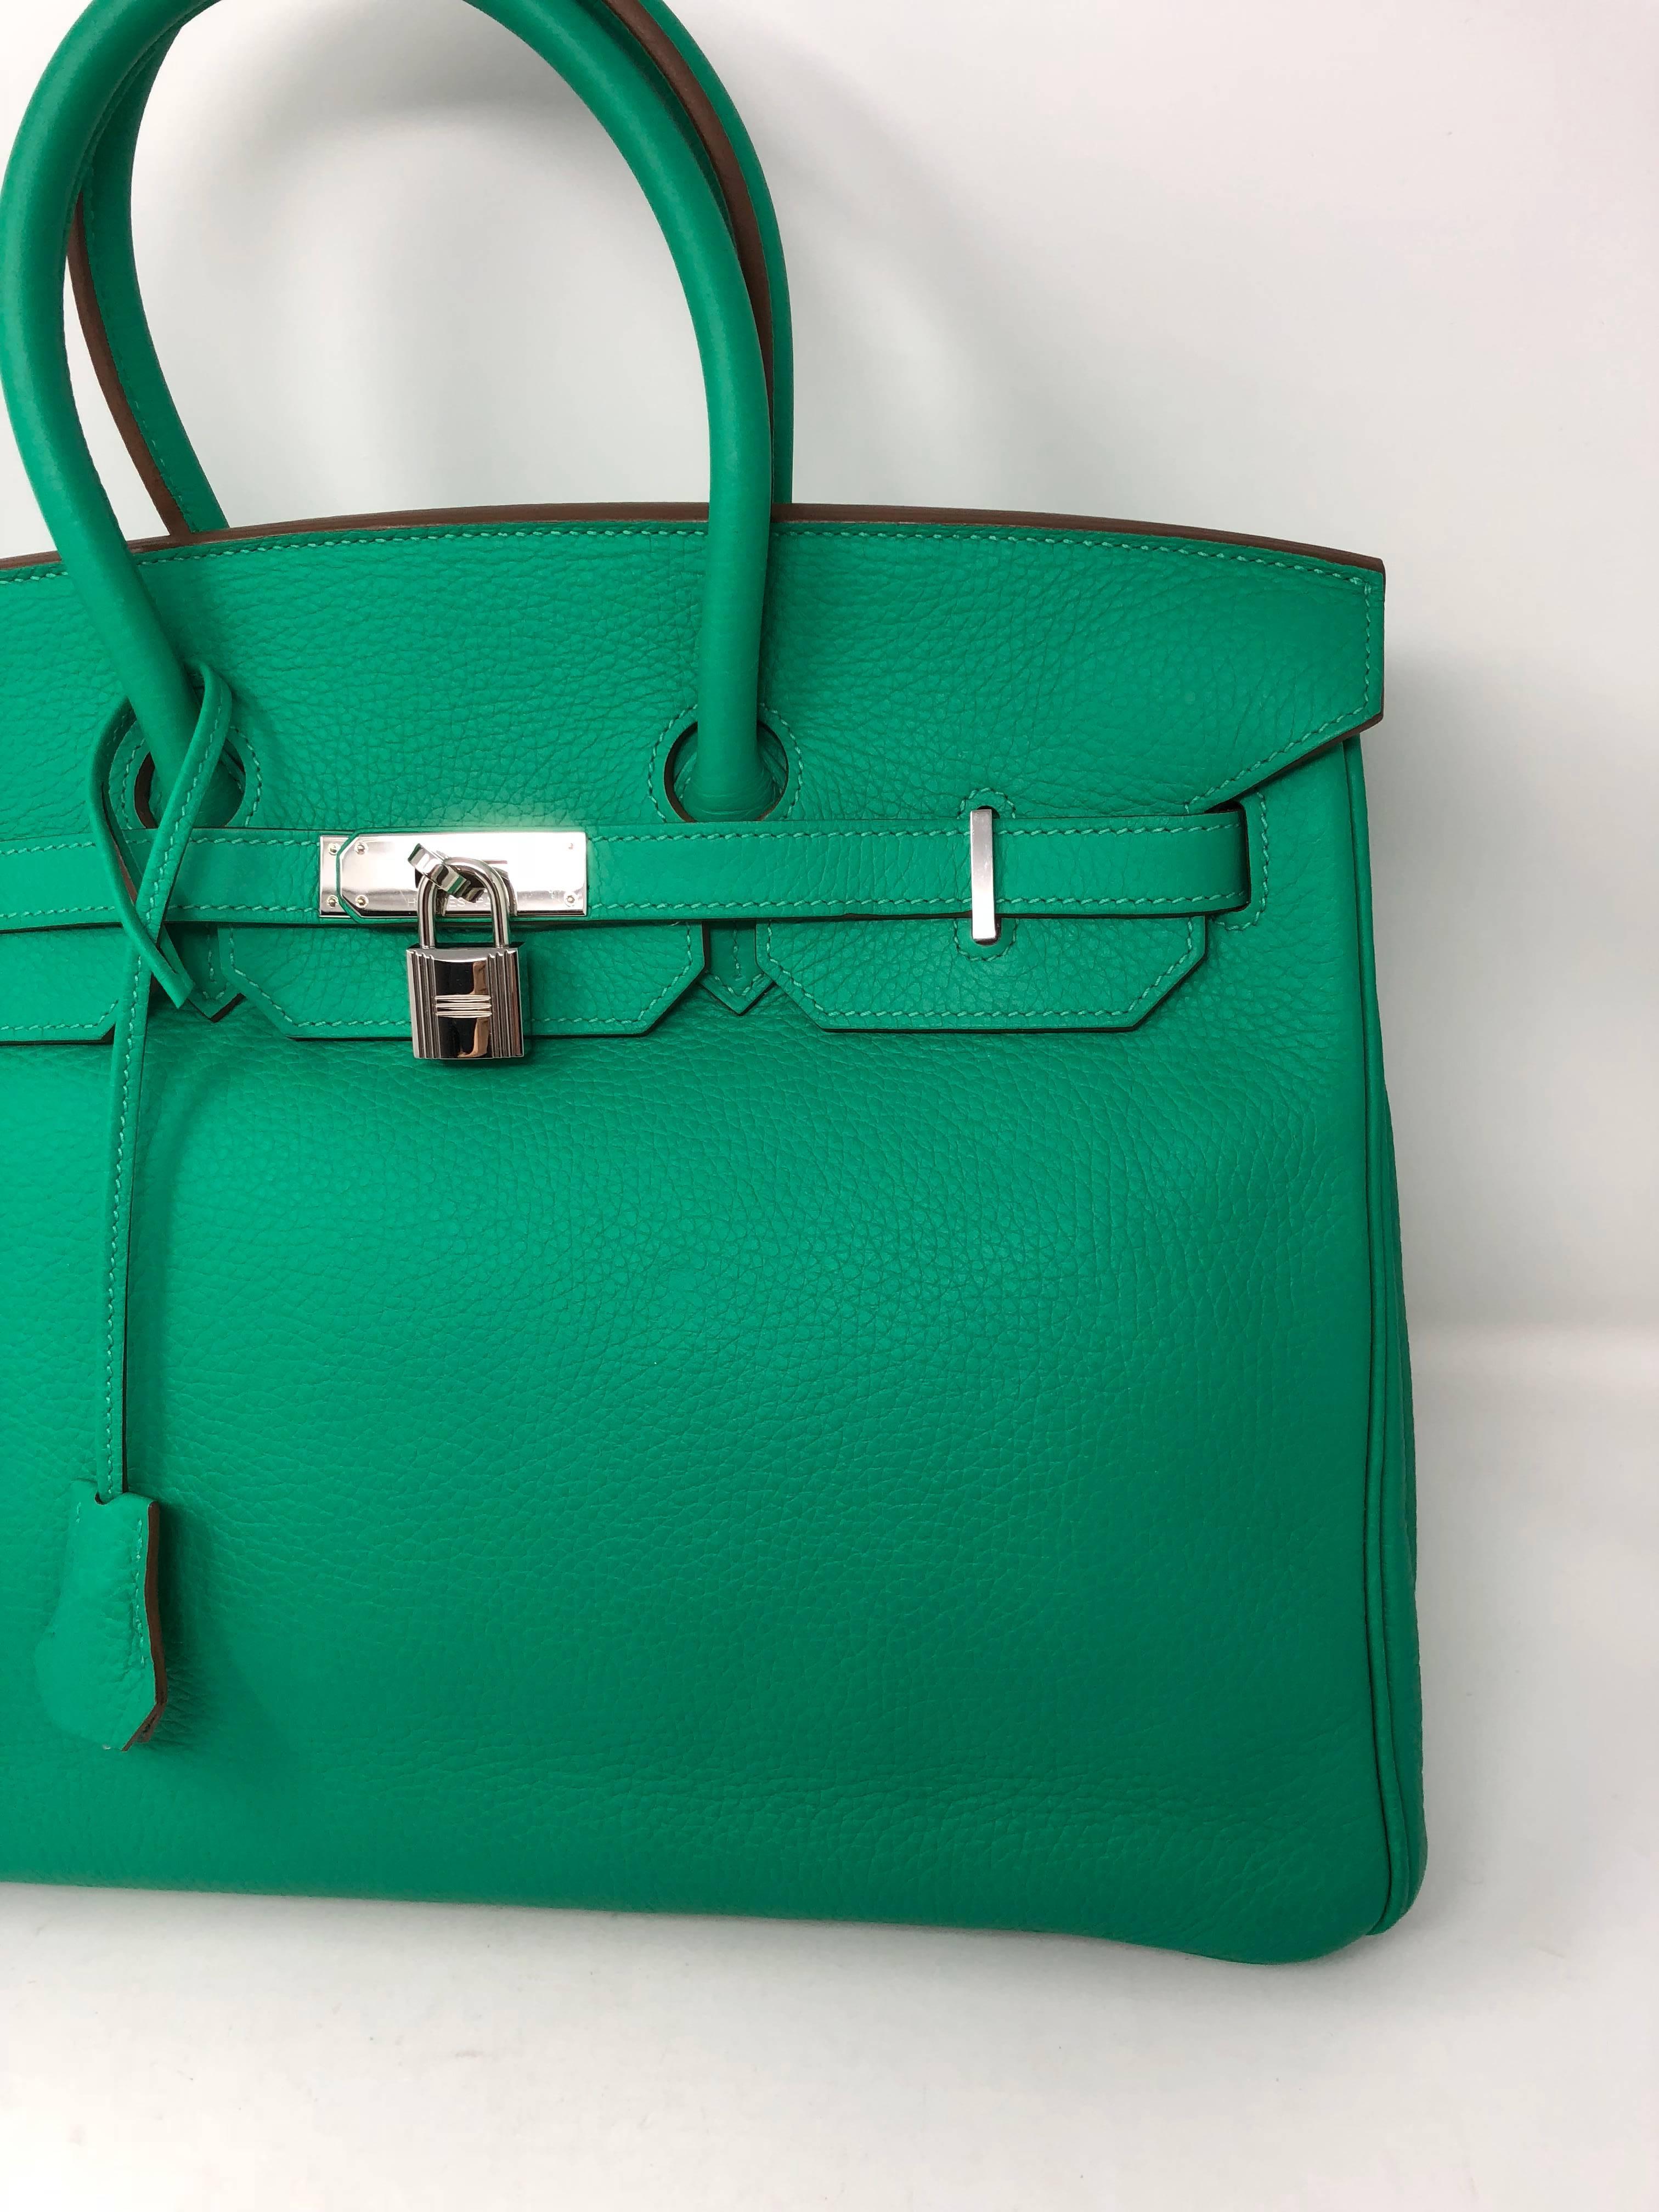 Menthe Green Hermes Birkin 35 in Veau Taurillon Clemence leather. From 2012 (P square) and palladium hardware. Good condition. Comes with clochette, keys and dust cover. Guaranteed authentic. 